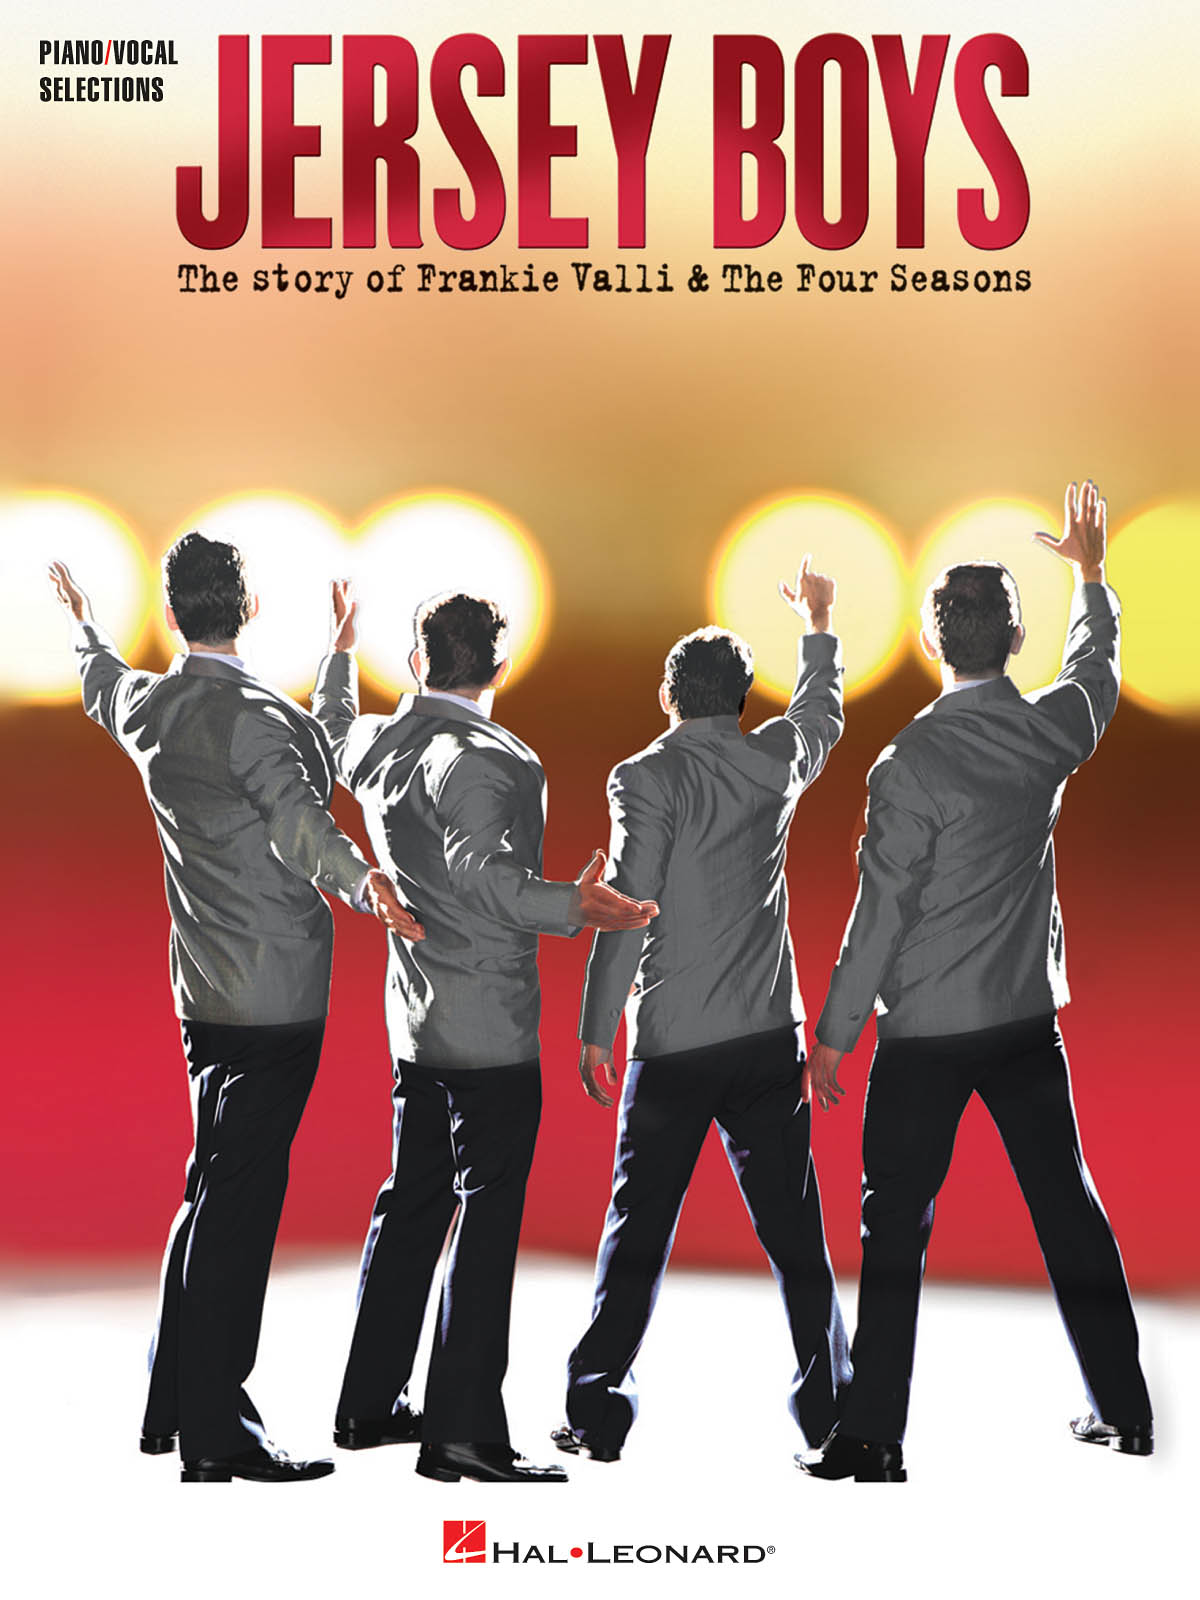 Frankie Valli  The Four Seasons: Jersey Boys - Vocal Selections: Piano  Vocal